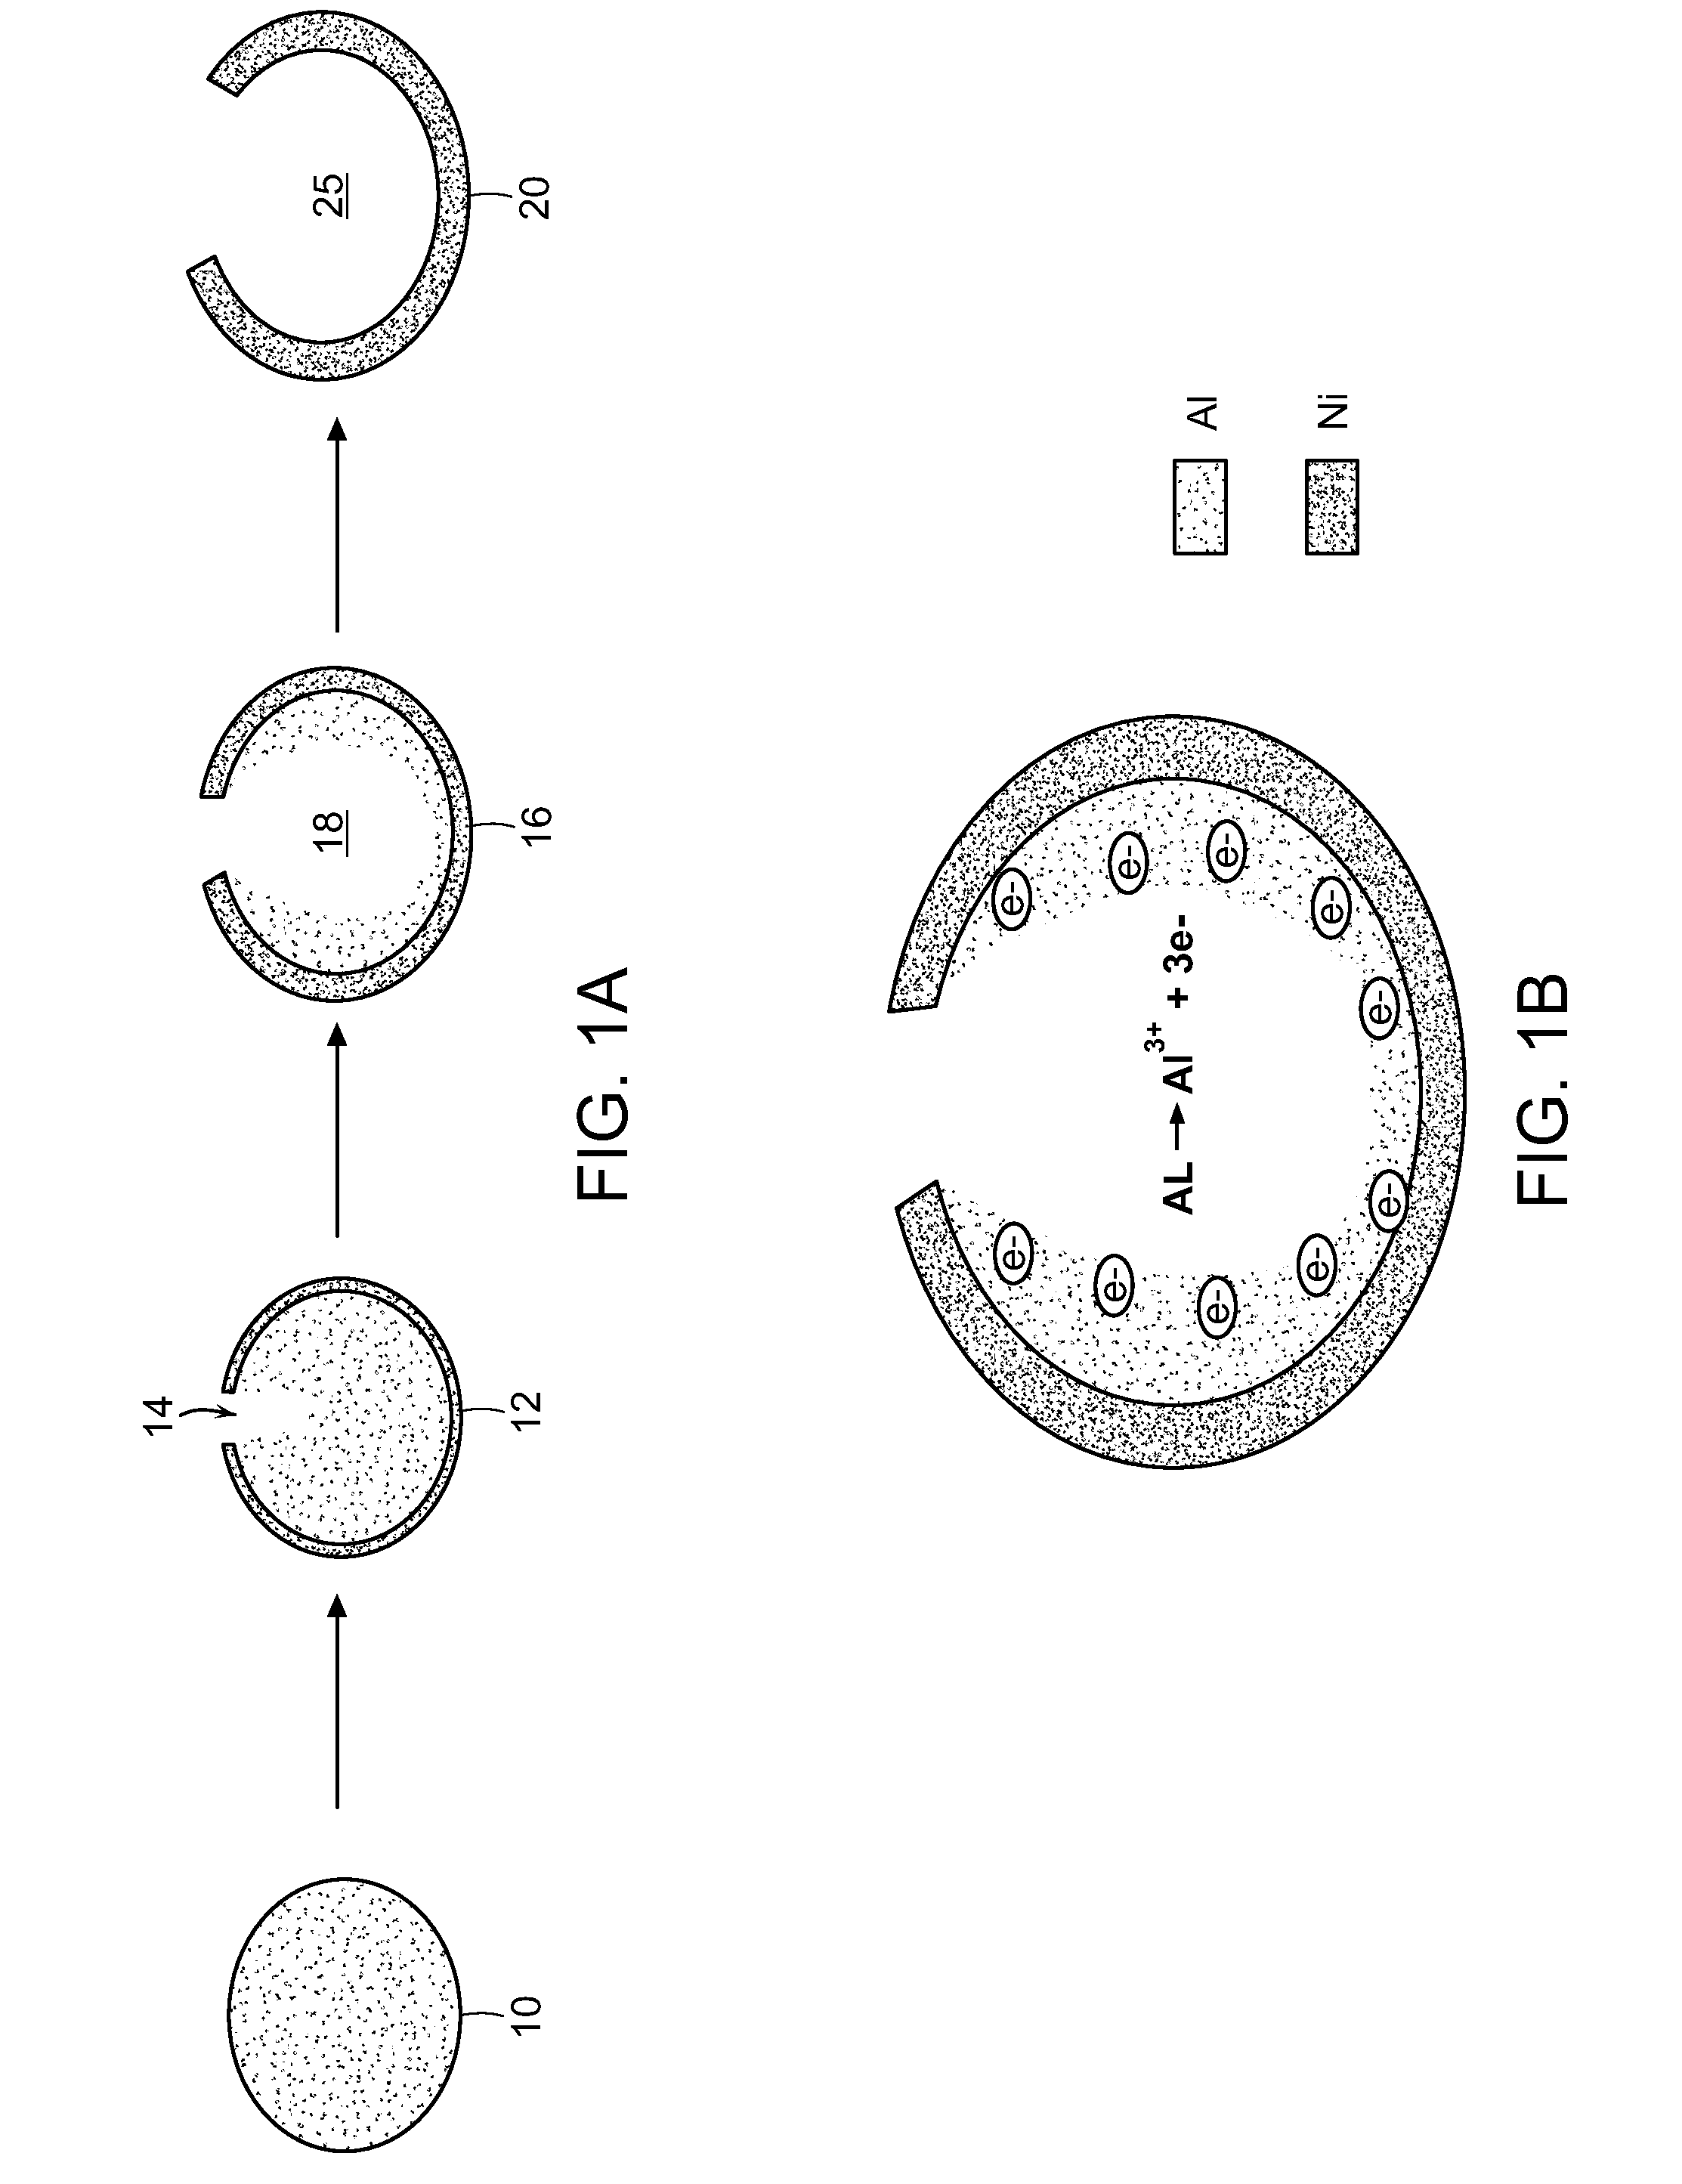 Methods for the fabrication of nanostructures heating elements